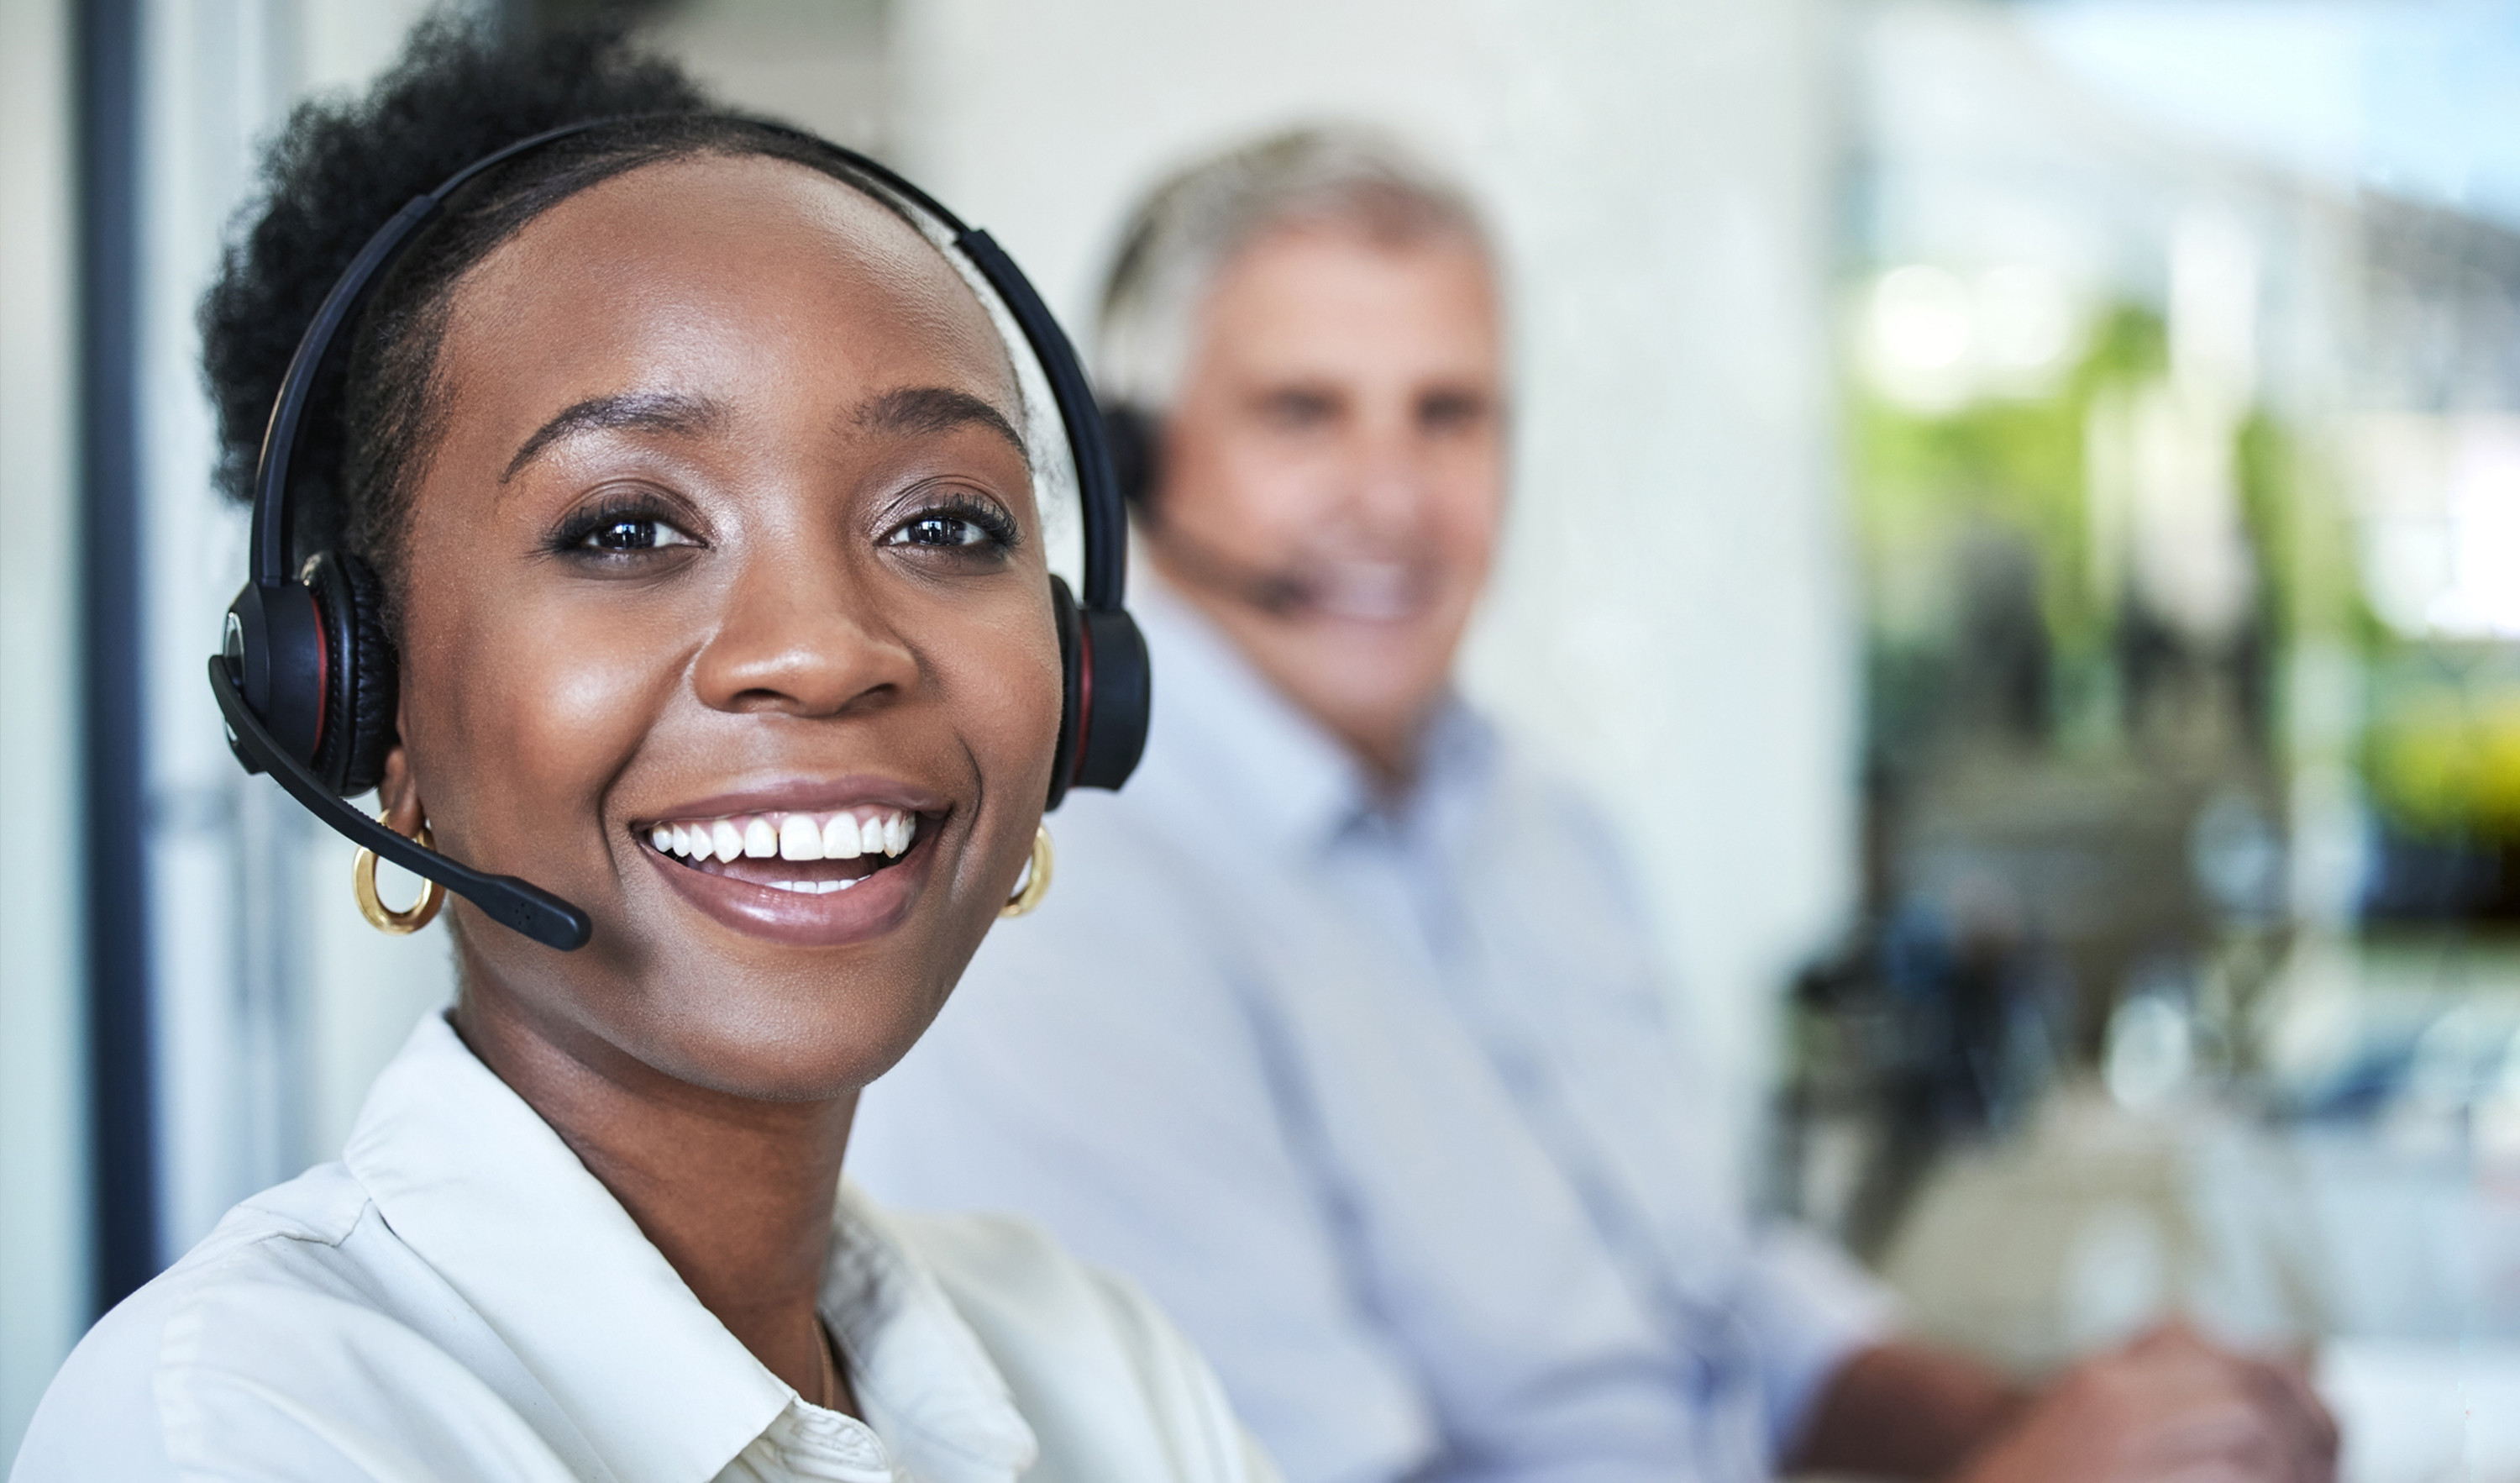 Woman with a headset smiling